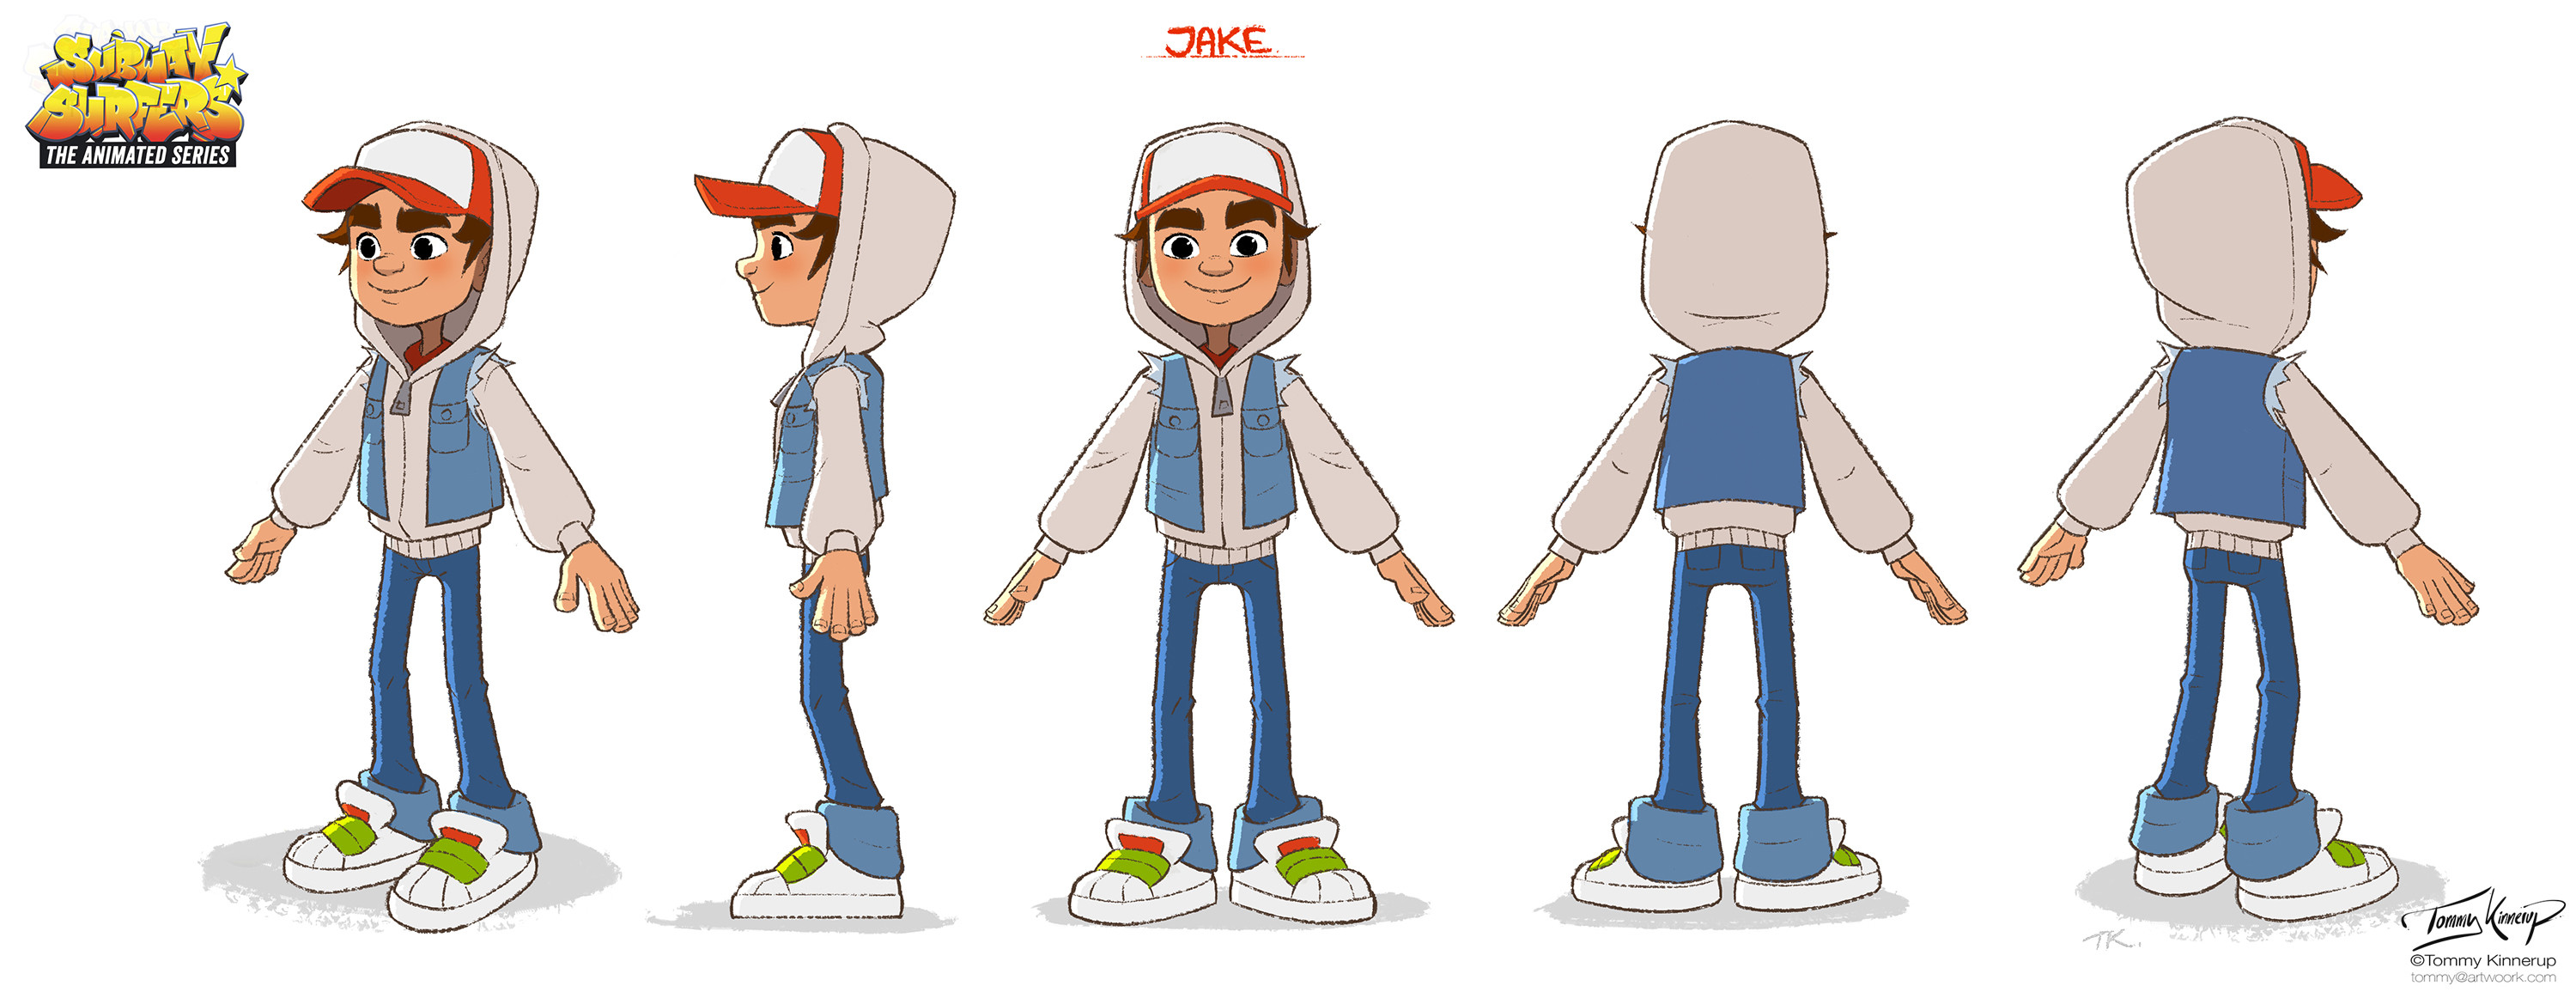 tommykinnerup - Designs for Subway Surfers The Animated Series